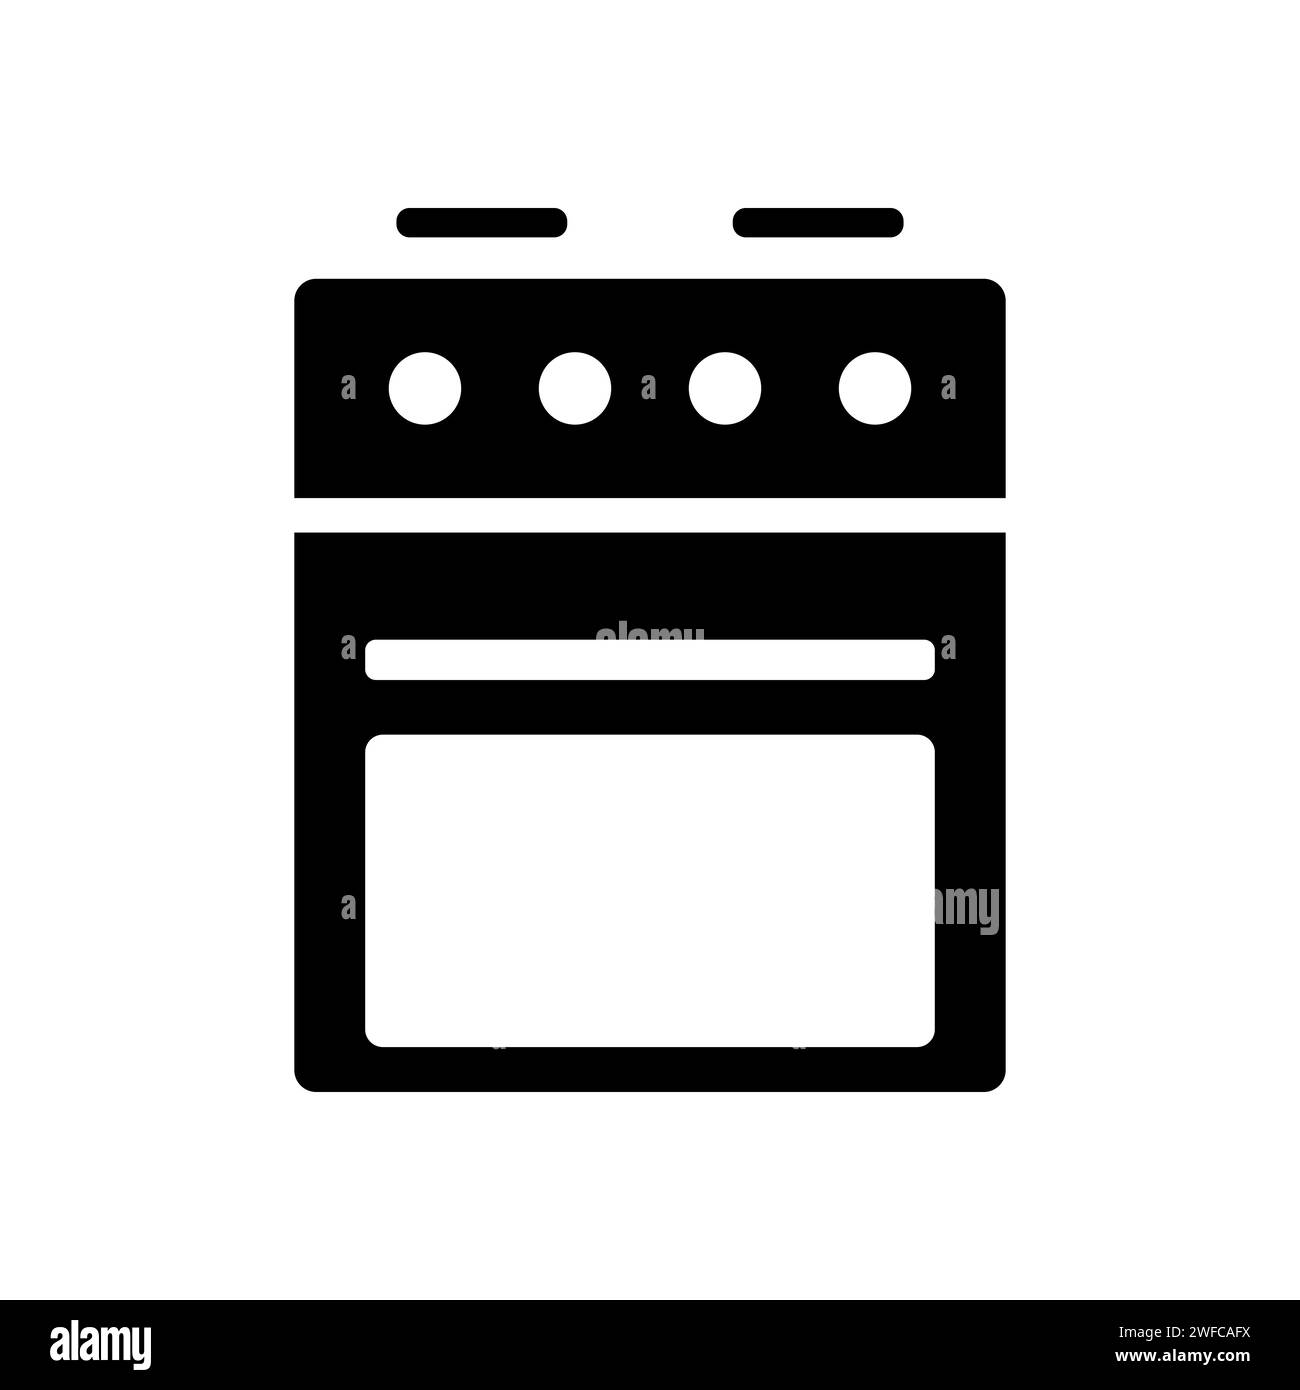 Flat kitchen stove icon. Cooking background. Vector illustration. stock image. EPS 10. Stock Vector